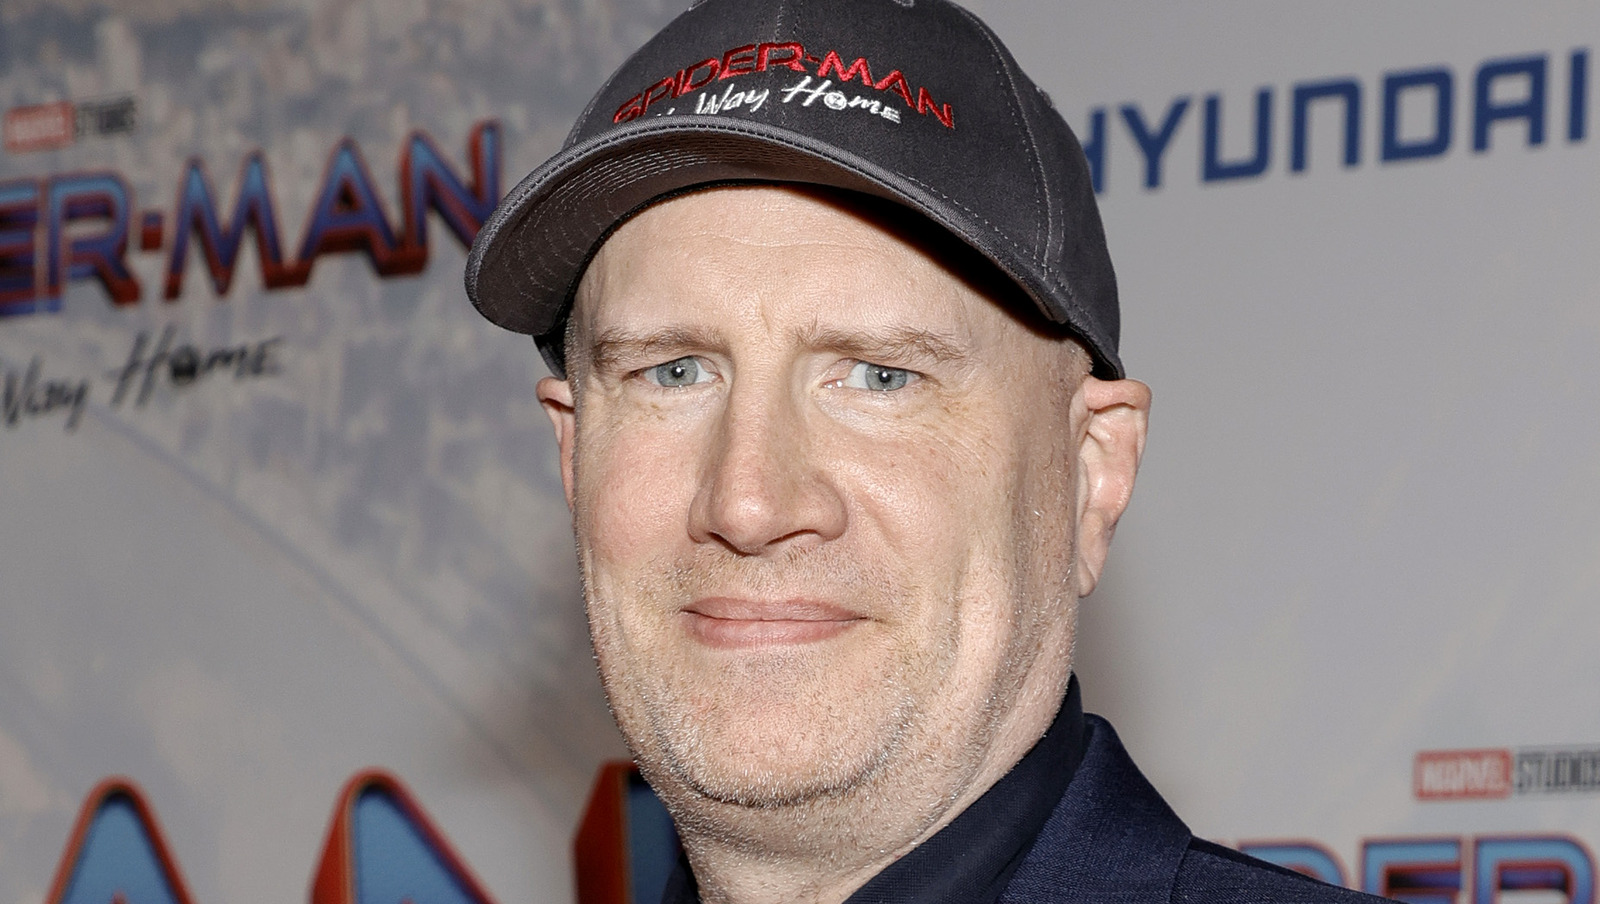 Kevin Feige Reveals What He Really Thinks About The Batman